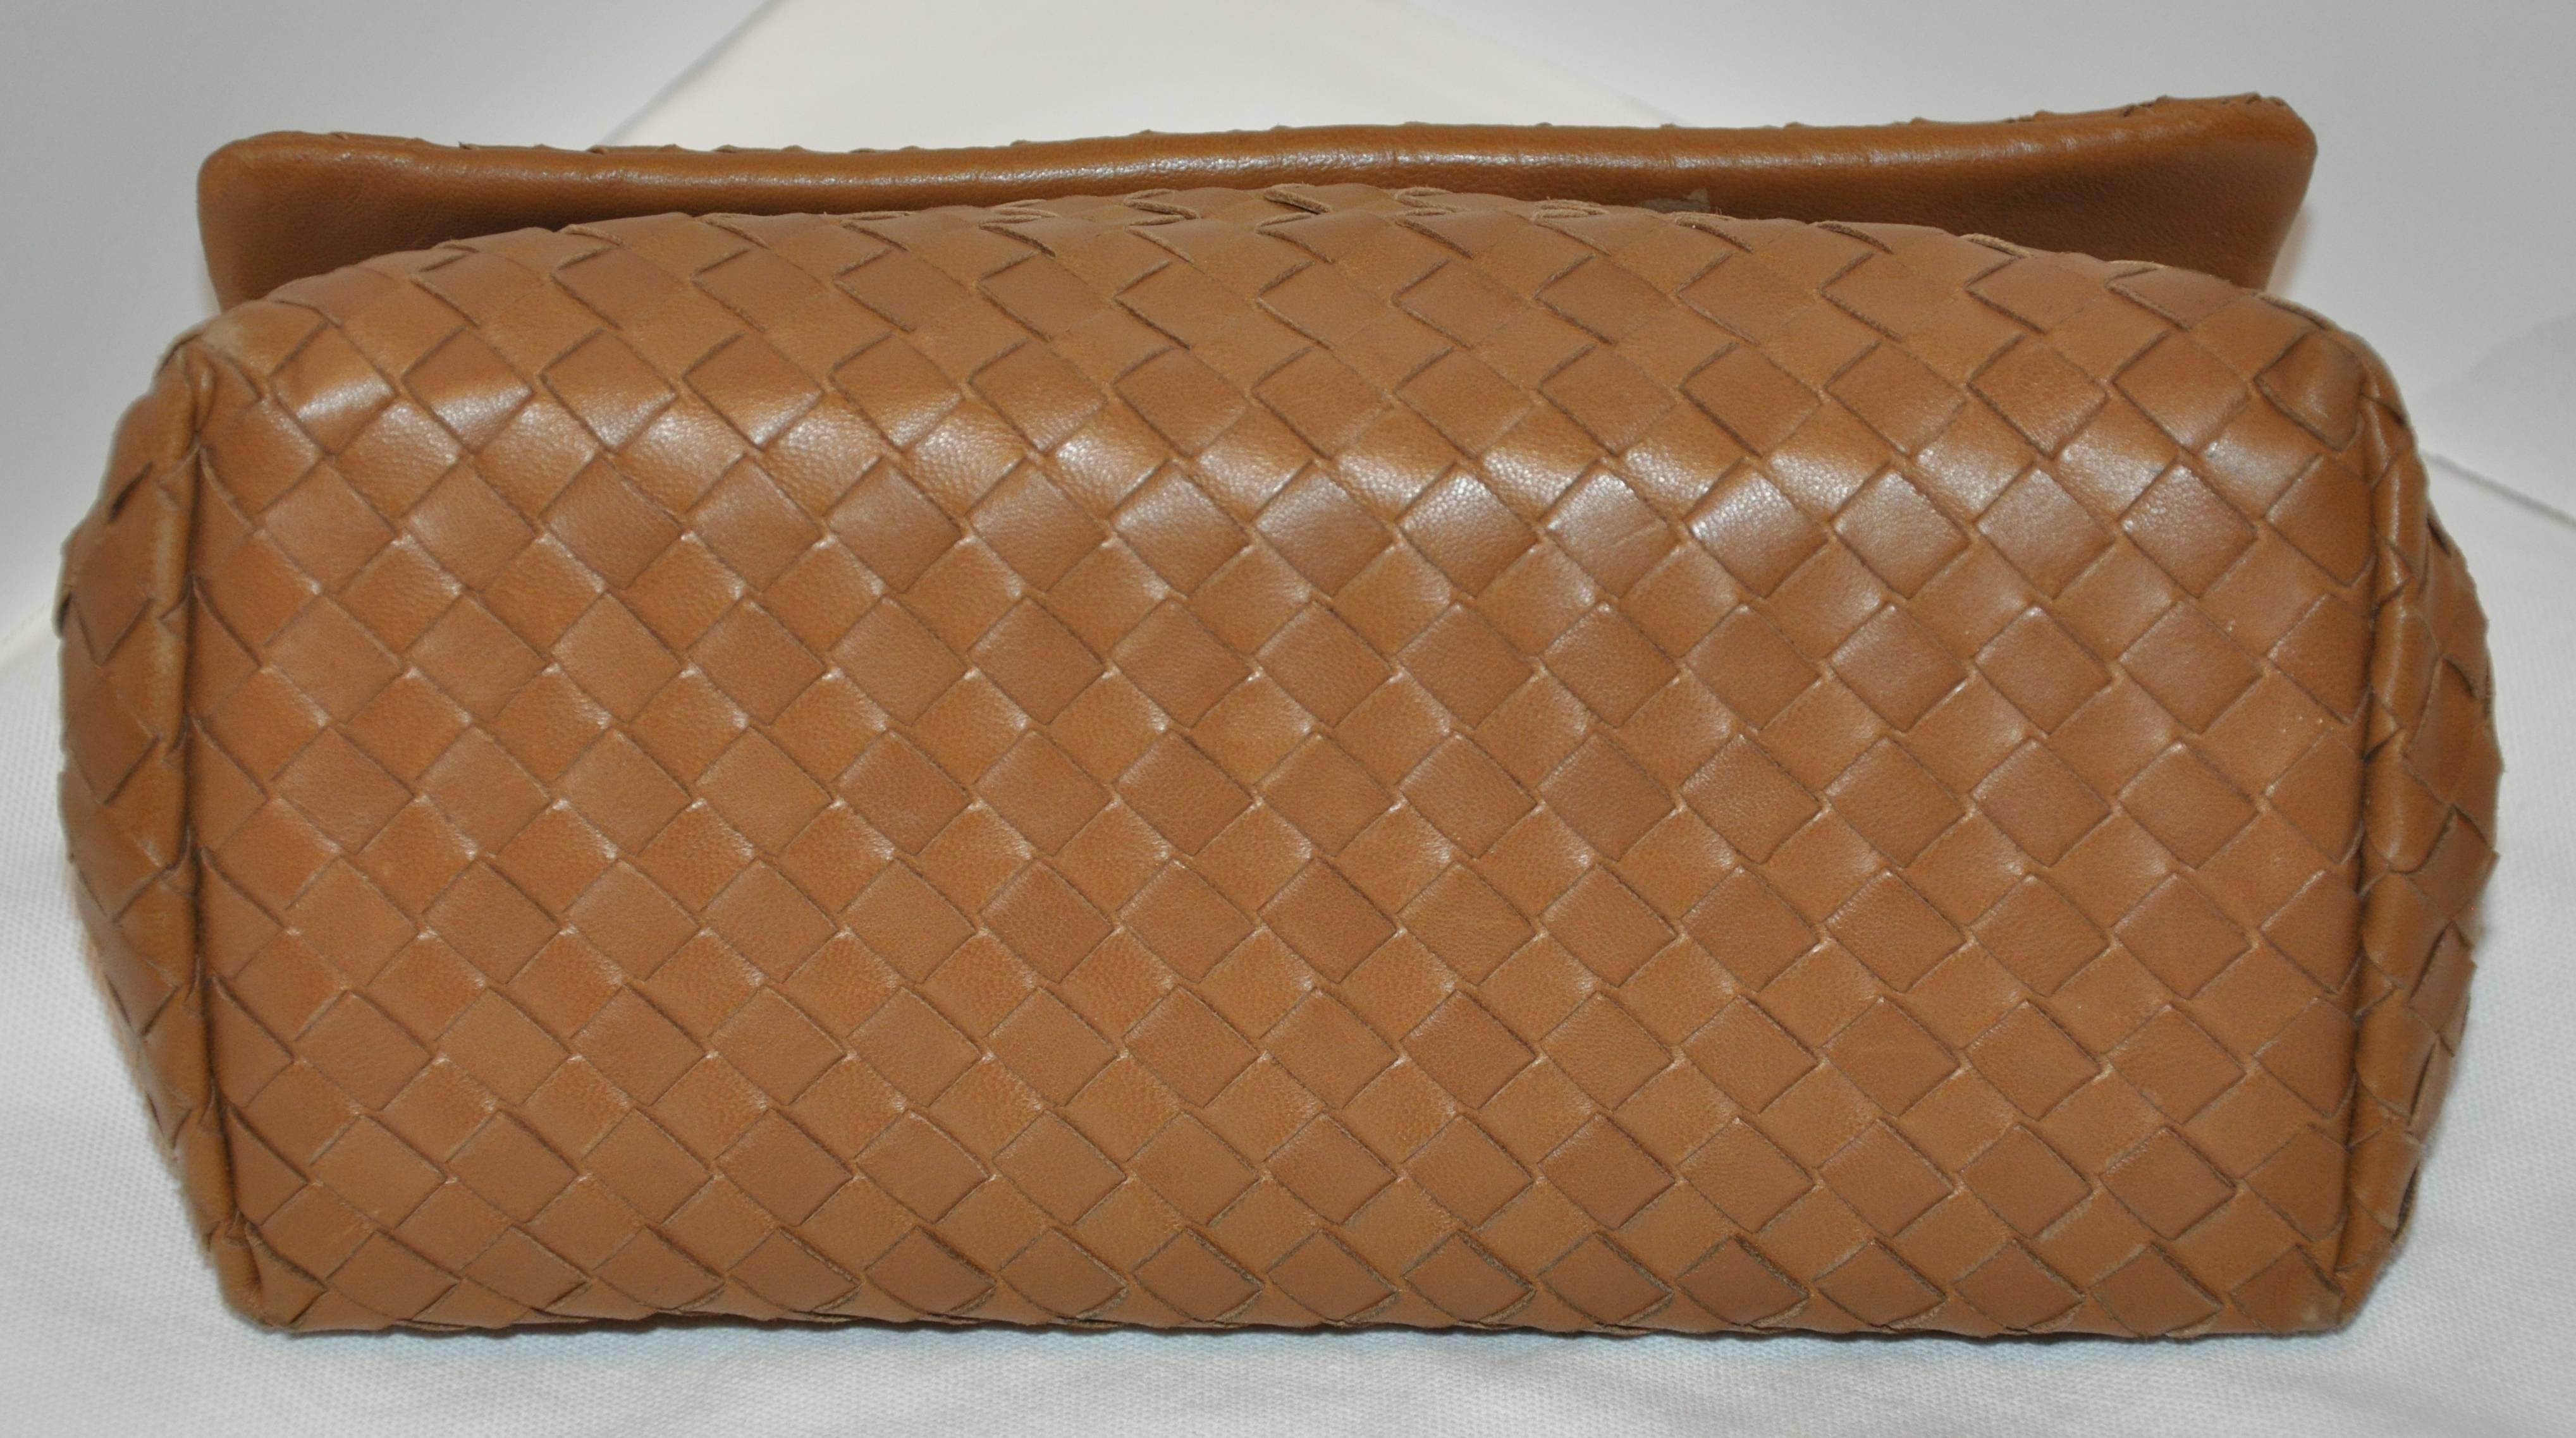          Bottega Veneta wonderfully elegant beige lambskin woven clutch has a two-sectional interior including a zippered compartment in-between. The flap-over closes with a magnetic center. The interior of the flap is slightly discolored (please